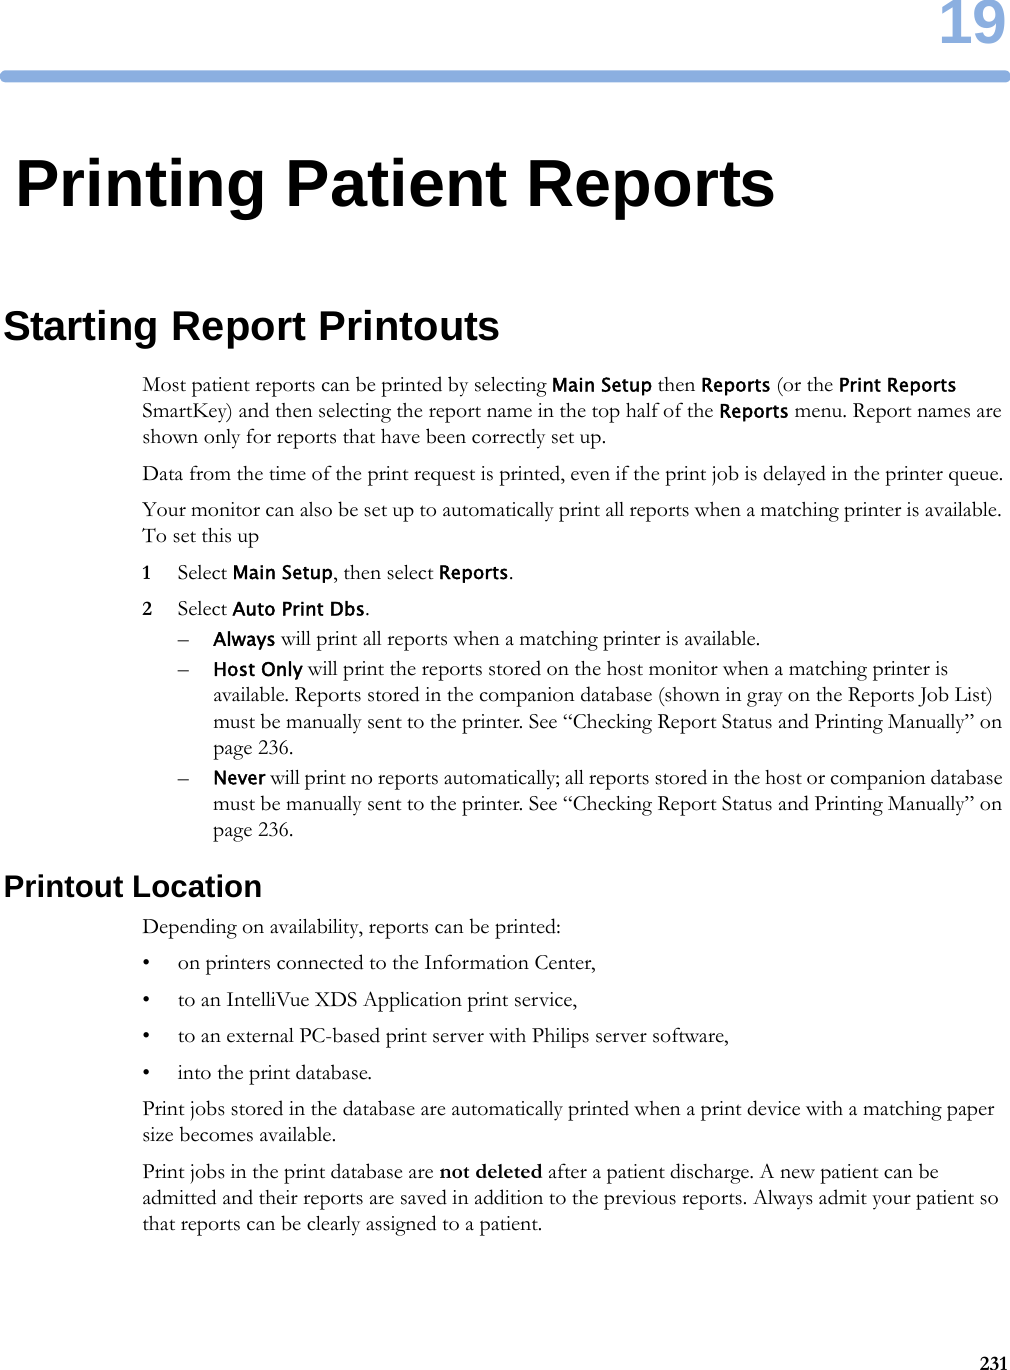 1923119Printing Patient ReportsStarting Report PrintoutsMost patient reports can be printed by selecting Main Setup then Reports (or the Print Reports SmartKey) and then selecting the report name in the top half of the Reports menu. Report names are shown only for reports that have been correctly set up.Data from the time of the print request is printed, even if the print job is delayed in the printer queue.Your monitor can also be set up to automatically print all reports when a matching printer is available. To set this up1Select Main Setup, then select Reports.2Select Auto Print Dbs.–Always will print all reports when a matching printer is available.–Host Only will print the reports stored on the host monitor when a matching printer is available. Reports stored in the companion database (shown in gray on the Reports Job List) must be manually sent to the printer. See “Checking Report Status and Printing Manually” on page 236.–Never will print no reports automatically; all reports stored in the host or companion database must be manually sent to the printer. See “Checking Report Status and Printing Manually” on page 236.Printout LocationDepending on availability, reports can be printed:• on printers connected to the Information Center,• to an IntelliVue XDS Application print service,• to an external PC-based print server with Philips server software,• into the print database.Print jobs stored in the database are automatically printed when a print device with a matching paper size becomes available.Print jobs in the print database are not deleted after a patient discharge. A new patient can be admitted and their reports are saved in addition to the previous reports. Always admit your patient so that reports can be clearly assigned to a patient.